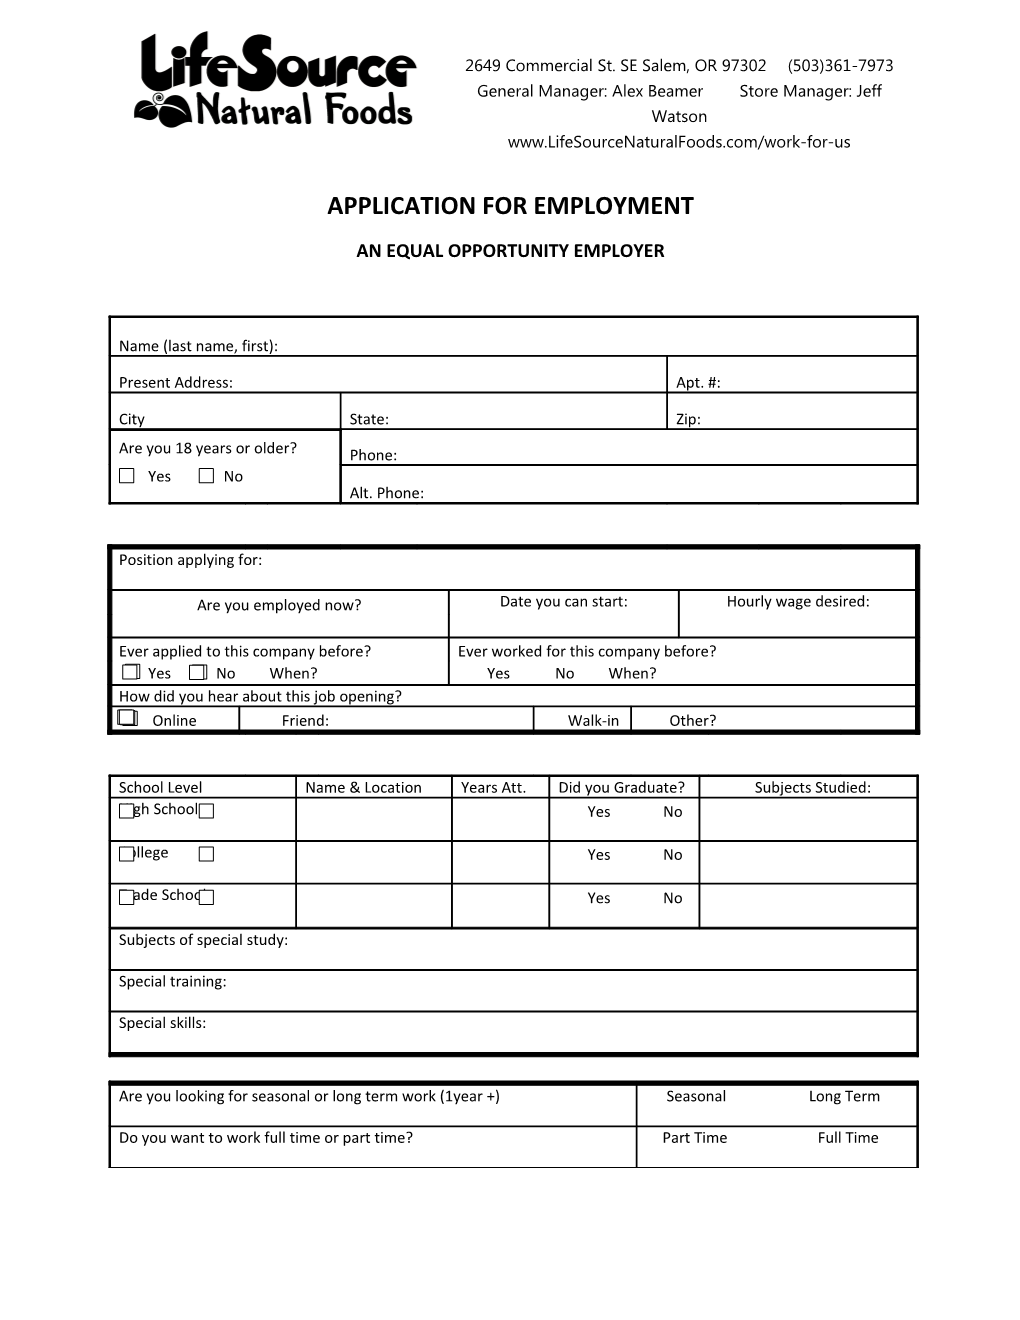 Application for Employment s59